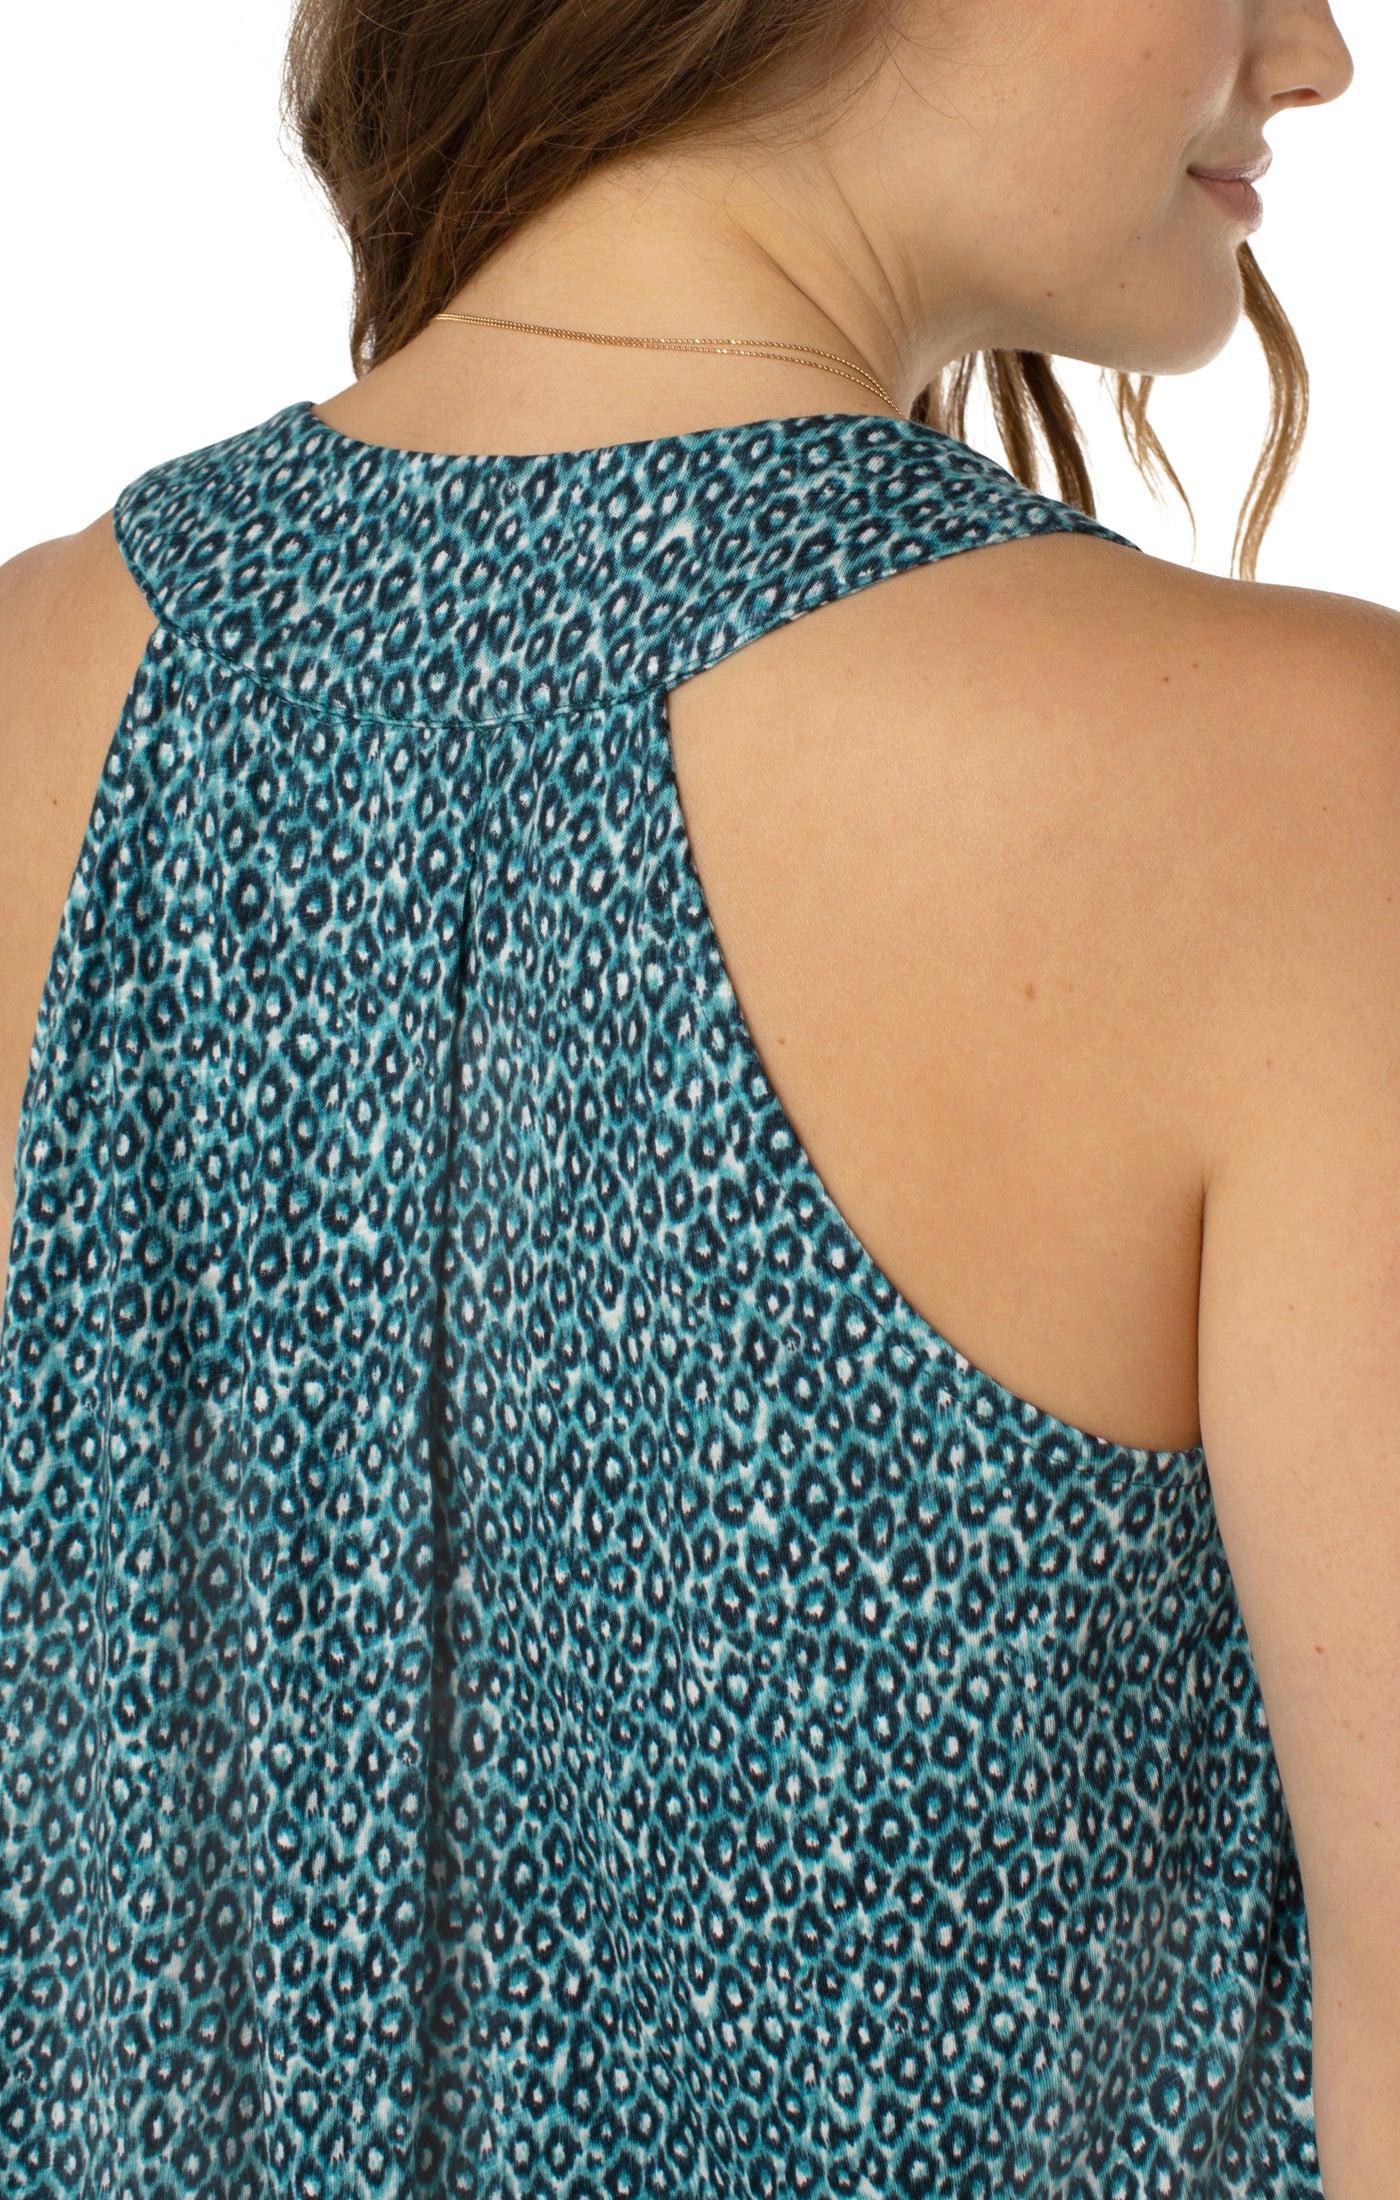 Liverpool pleated front sleeveless modal knit top (teal)